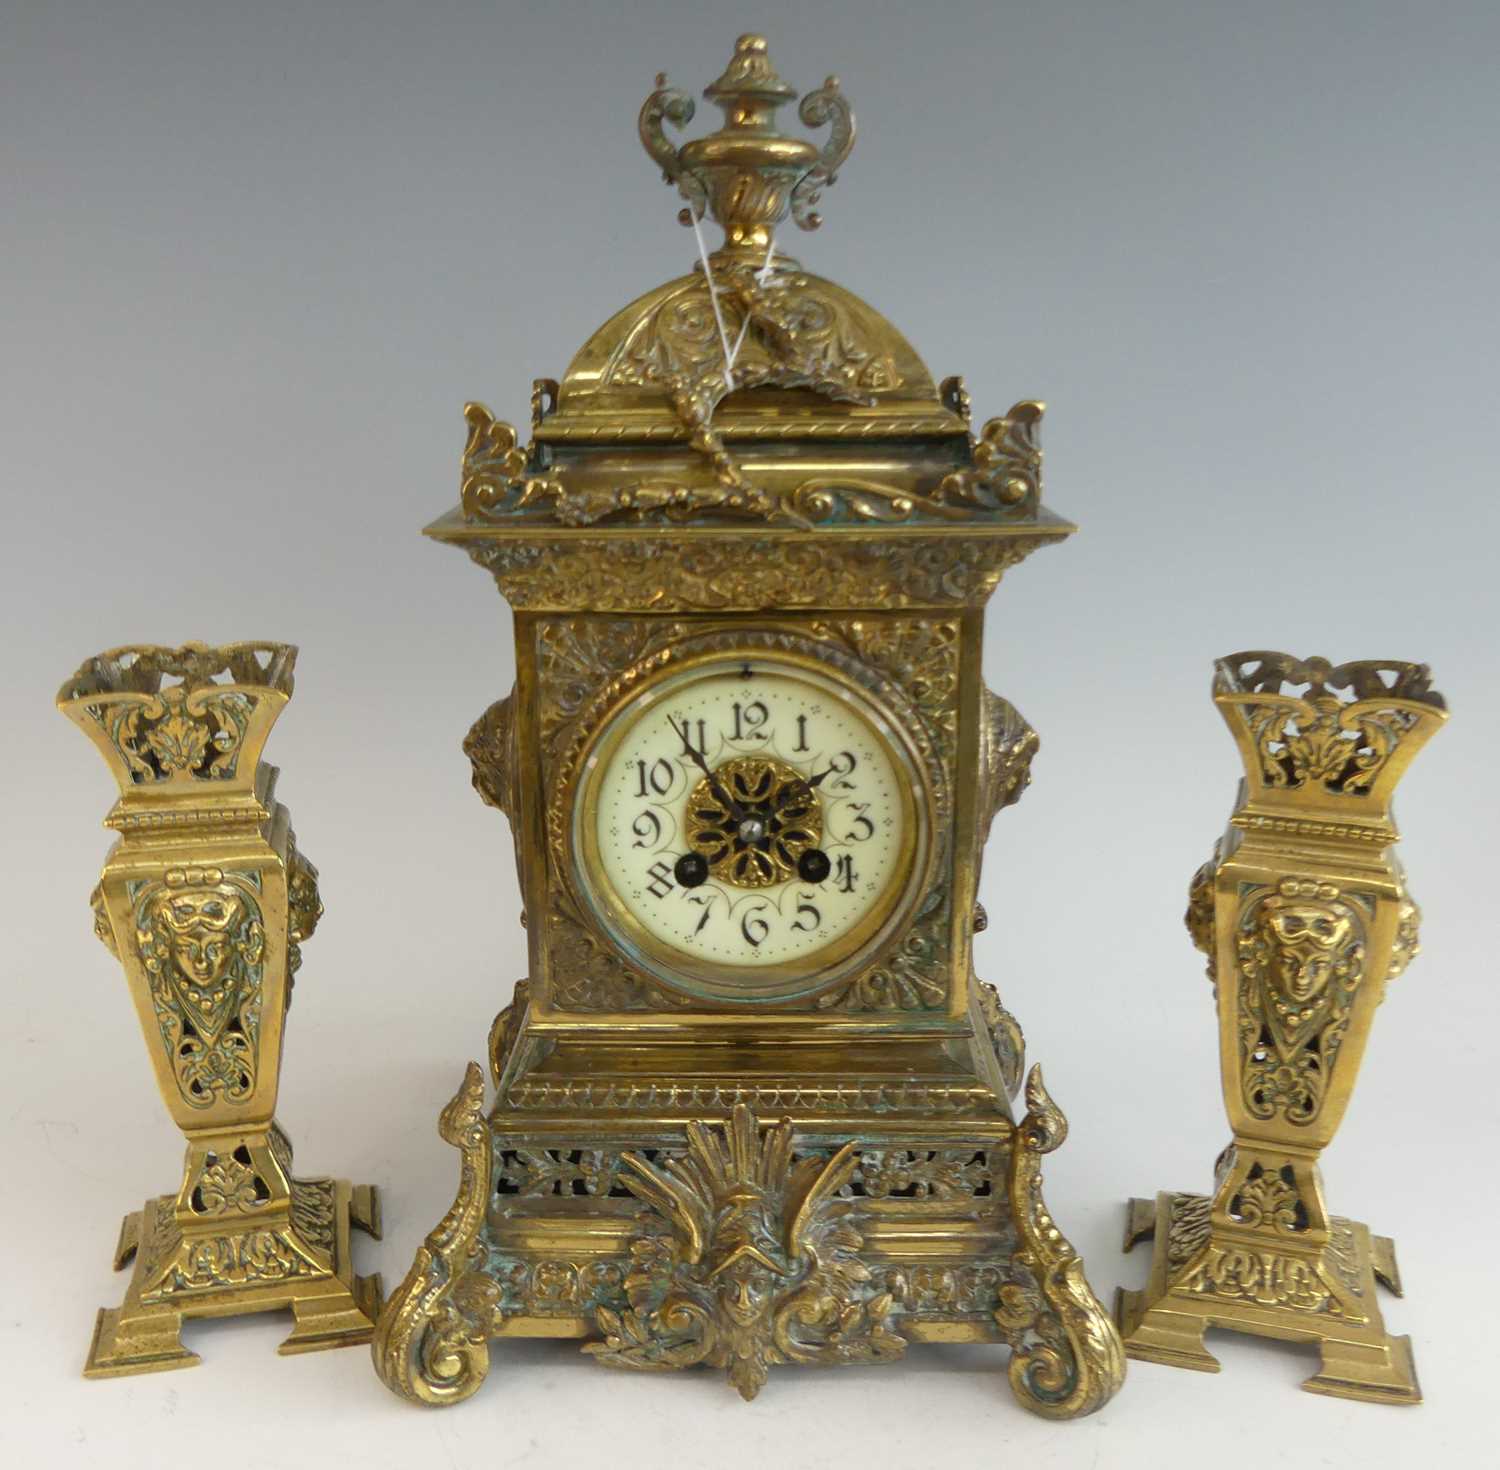 A late 19th century French cast and gilt brass three-piece clock garniture, comprising; clock of